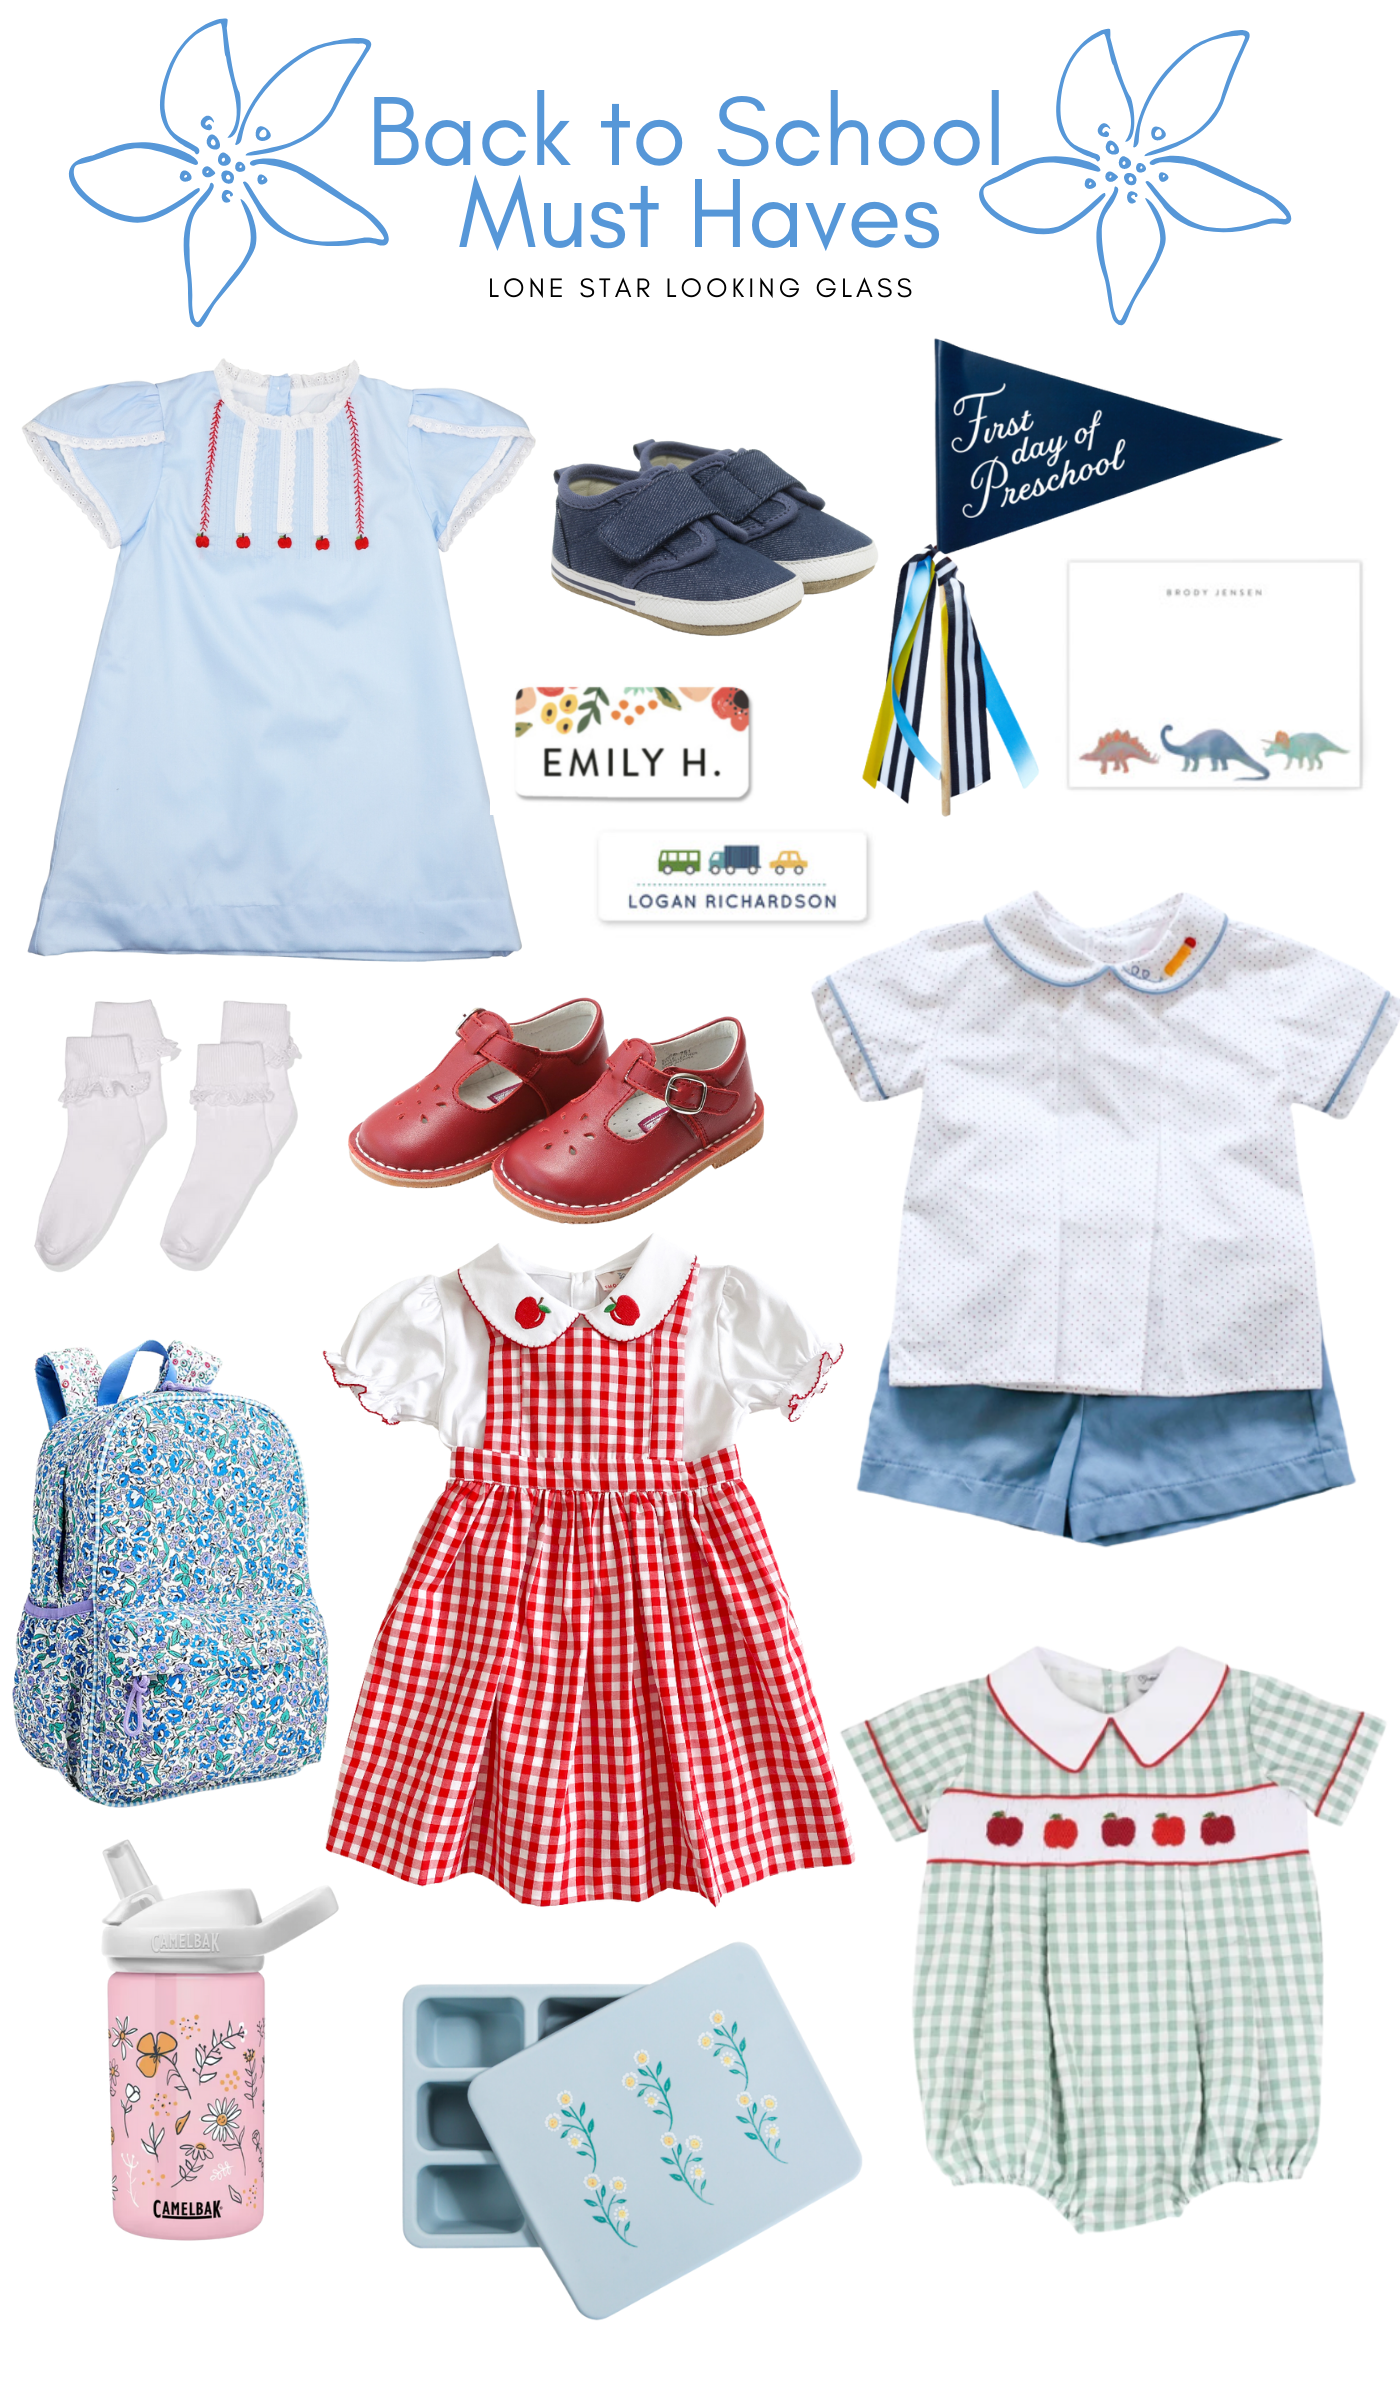 Back to School Must Haves by popular Memphis fashion blog, Lone Star Looking Glass: collage image of floral back pack, floral print water bottle, floral print bento box, first day of preschool pendant flag, name tags, red Mary Jane shoes, white lace socks, blue smocked dress, red and white gingham pinafore, blue velcro strap sneakers, green and white gingham and apple embroidered romper, and white color shirt and chambray shorts. 